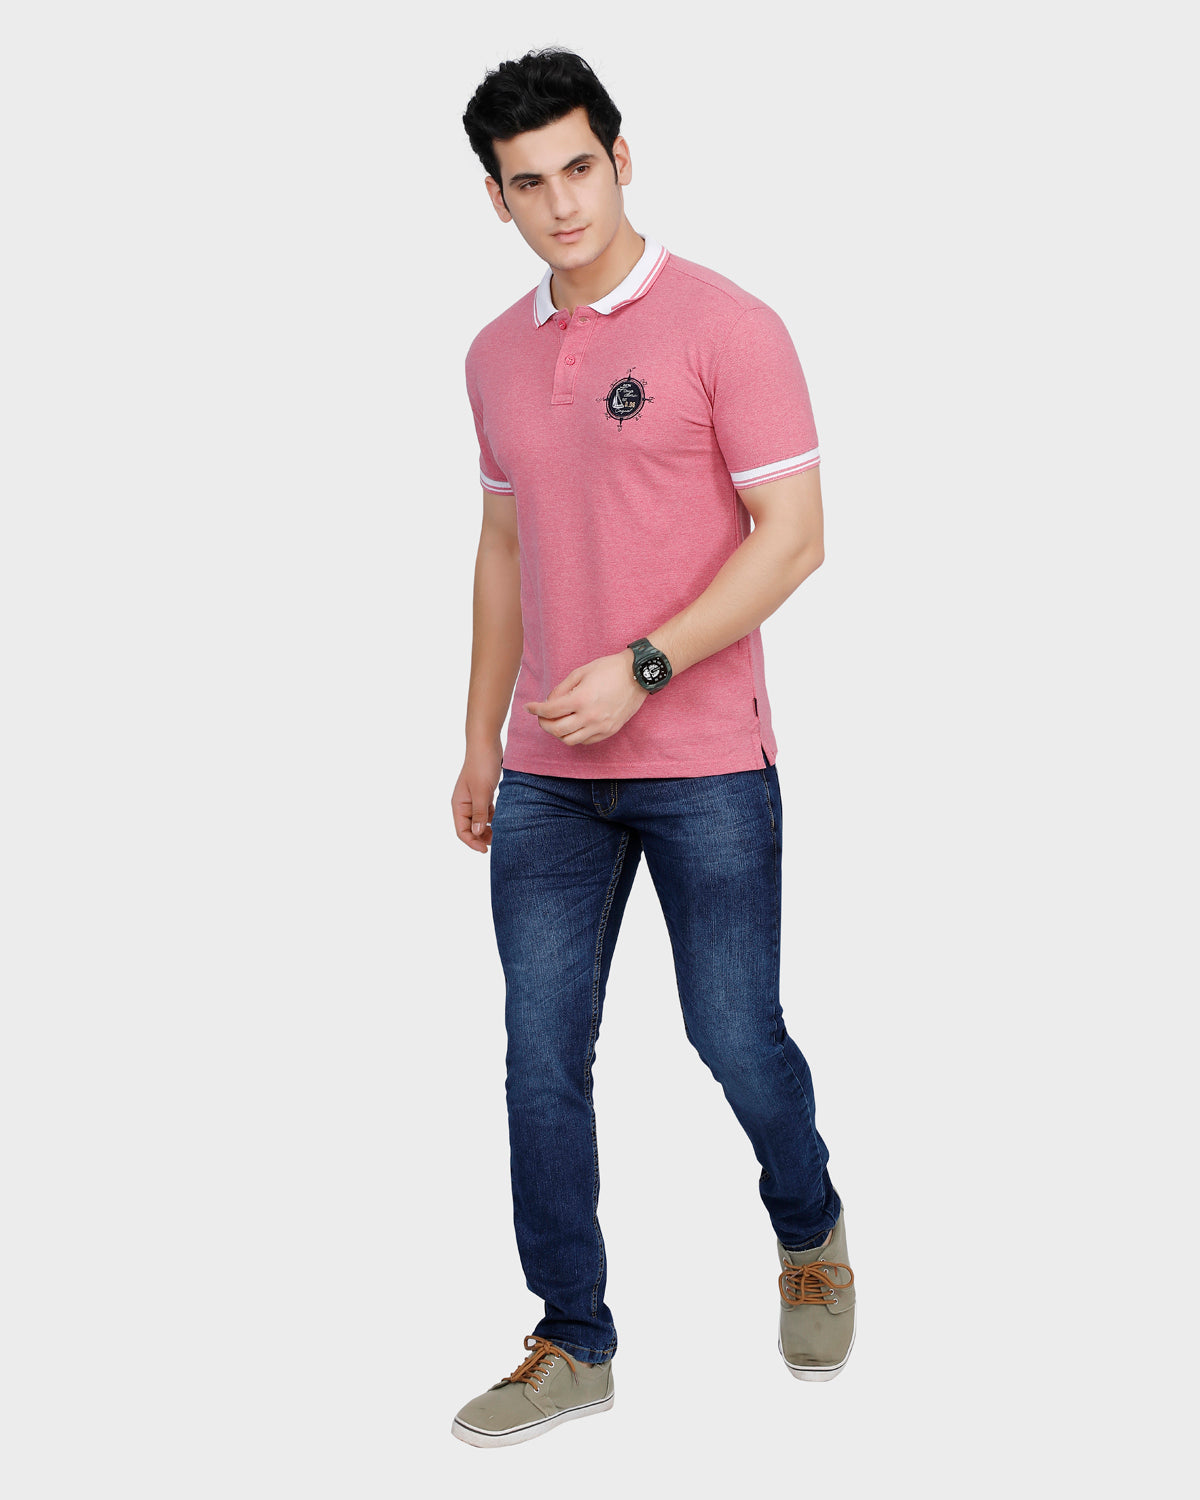 Men's Light Pink Solid Cotton Polo Shirt